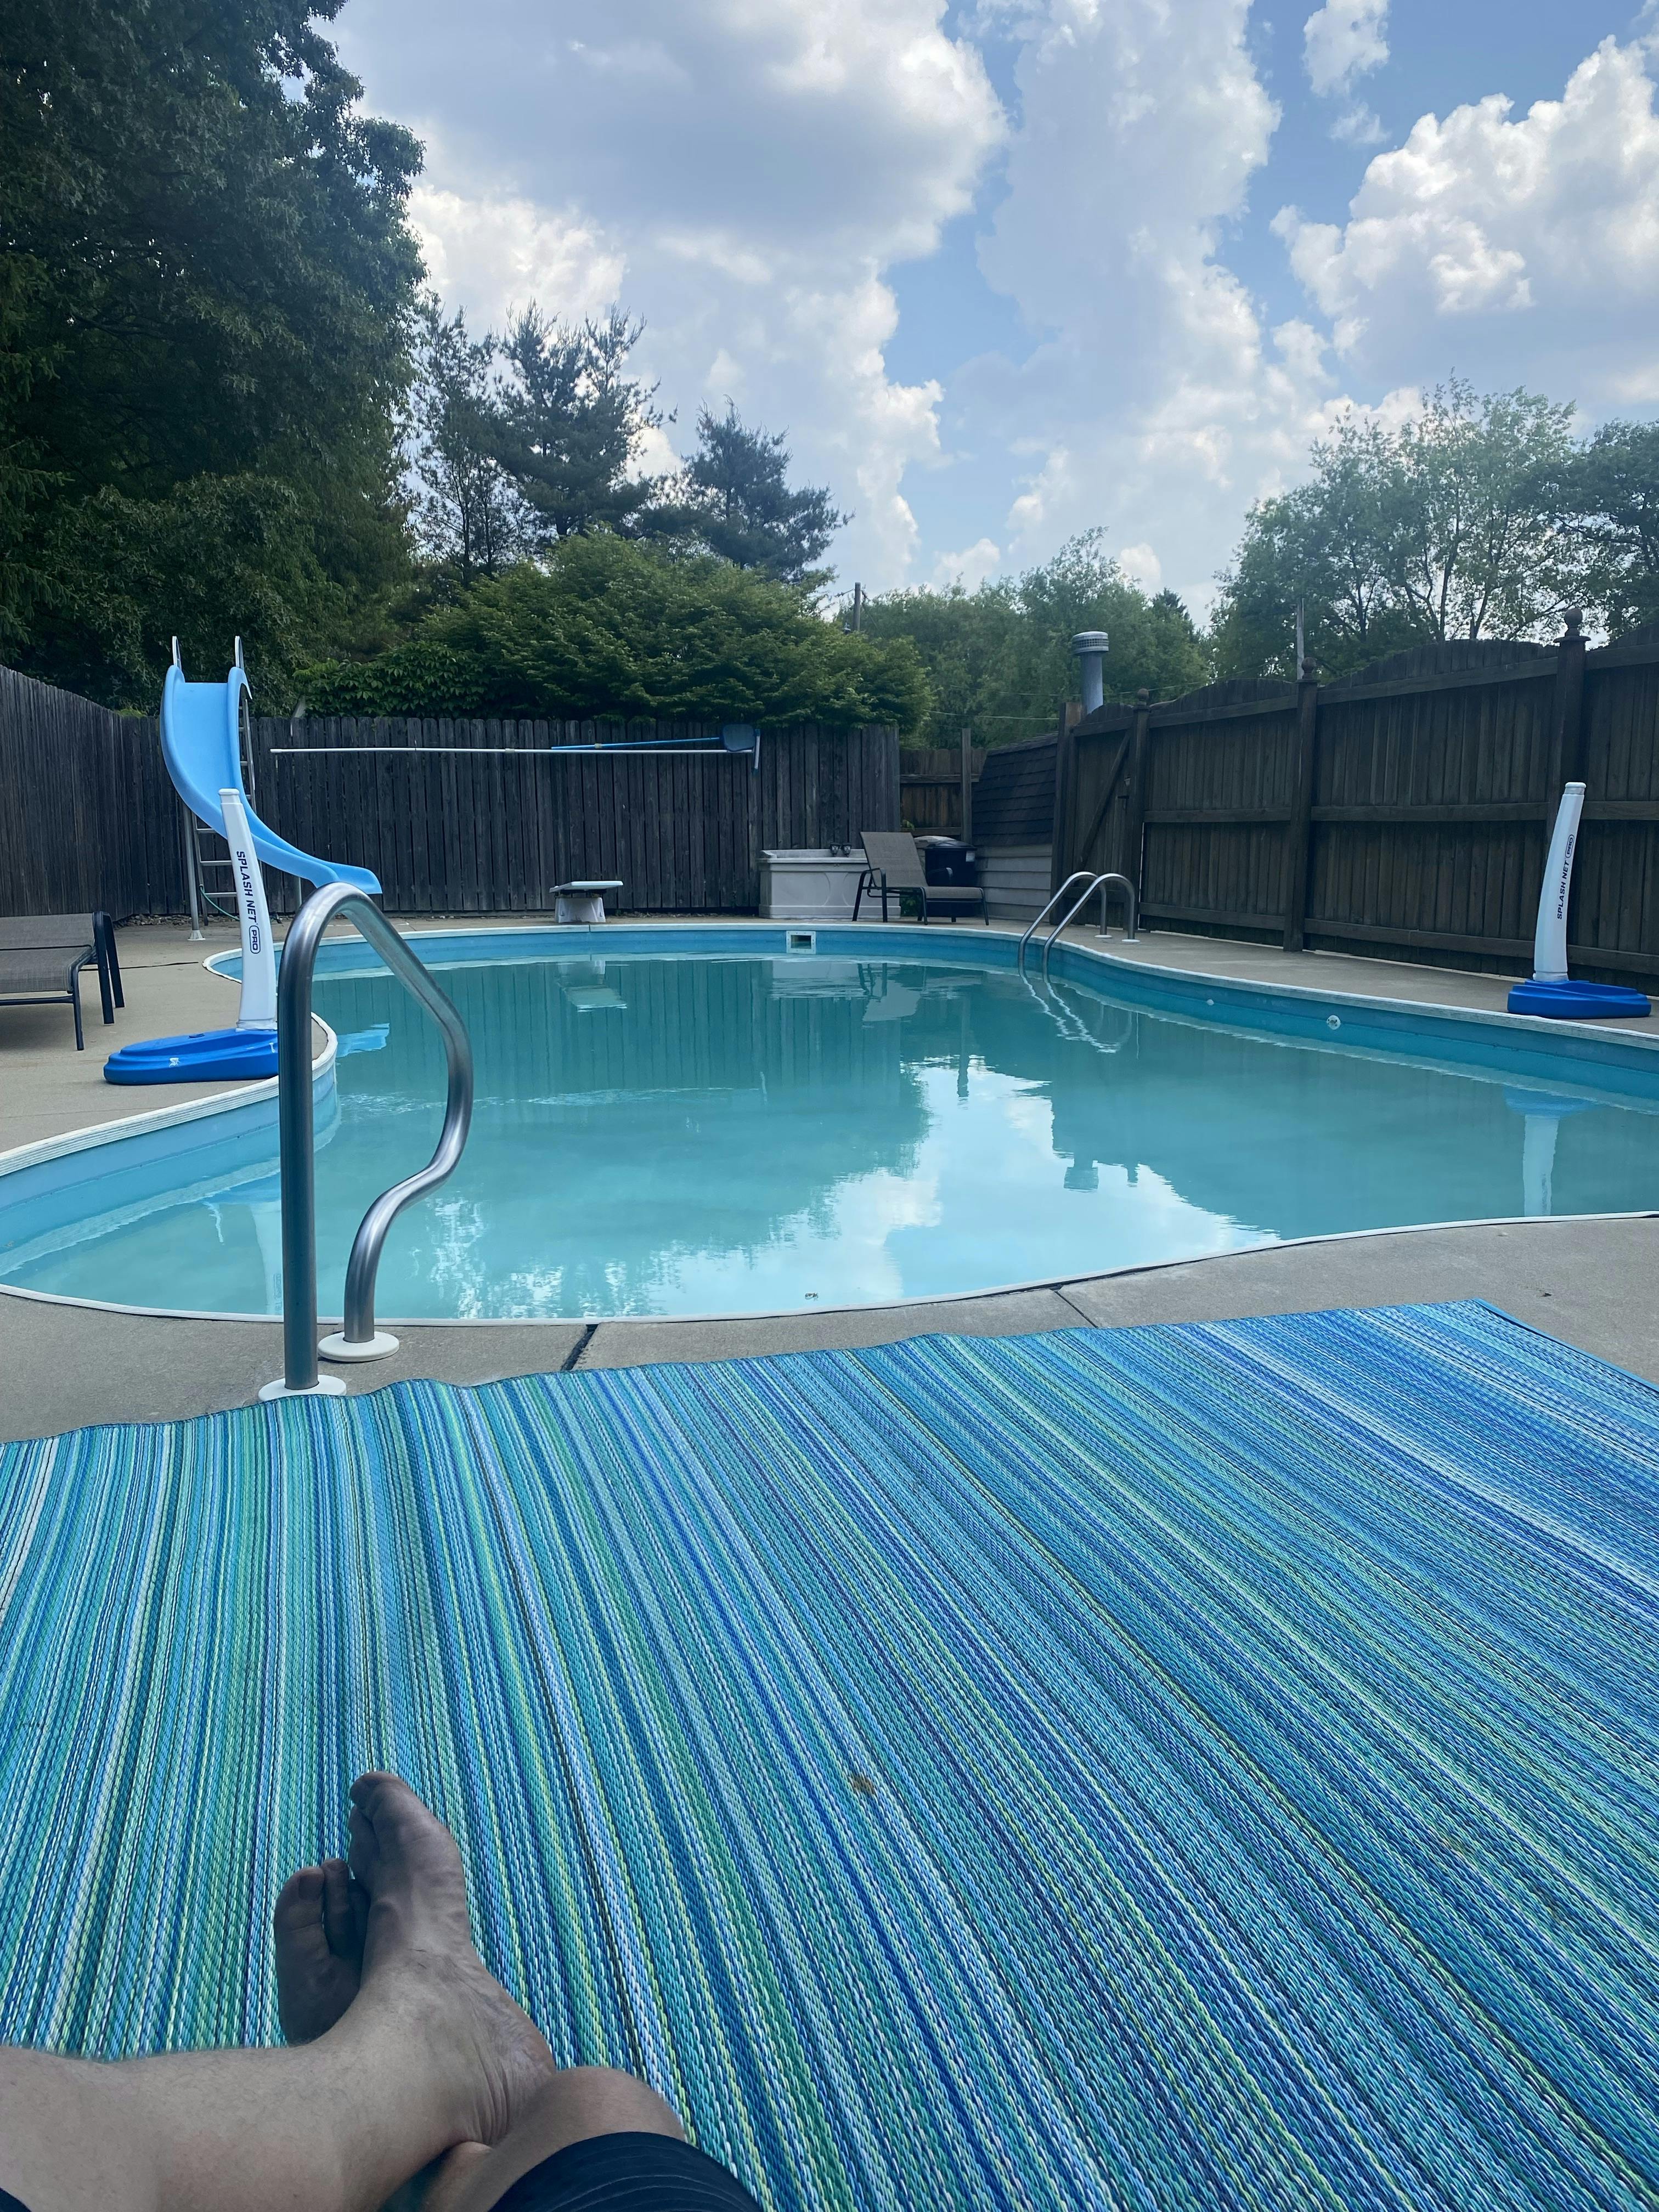 Time for SummerPOOL SLIDES and SHADE!